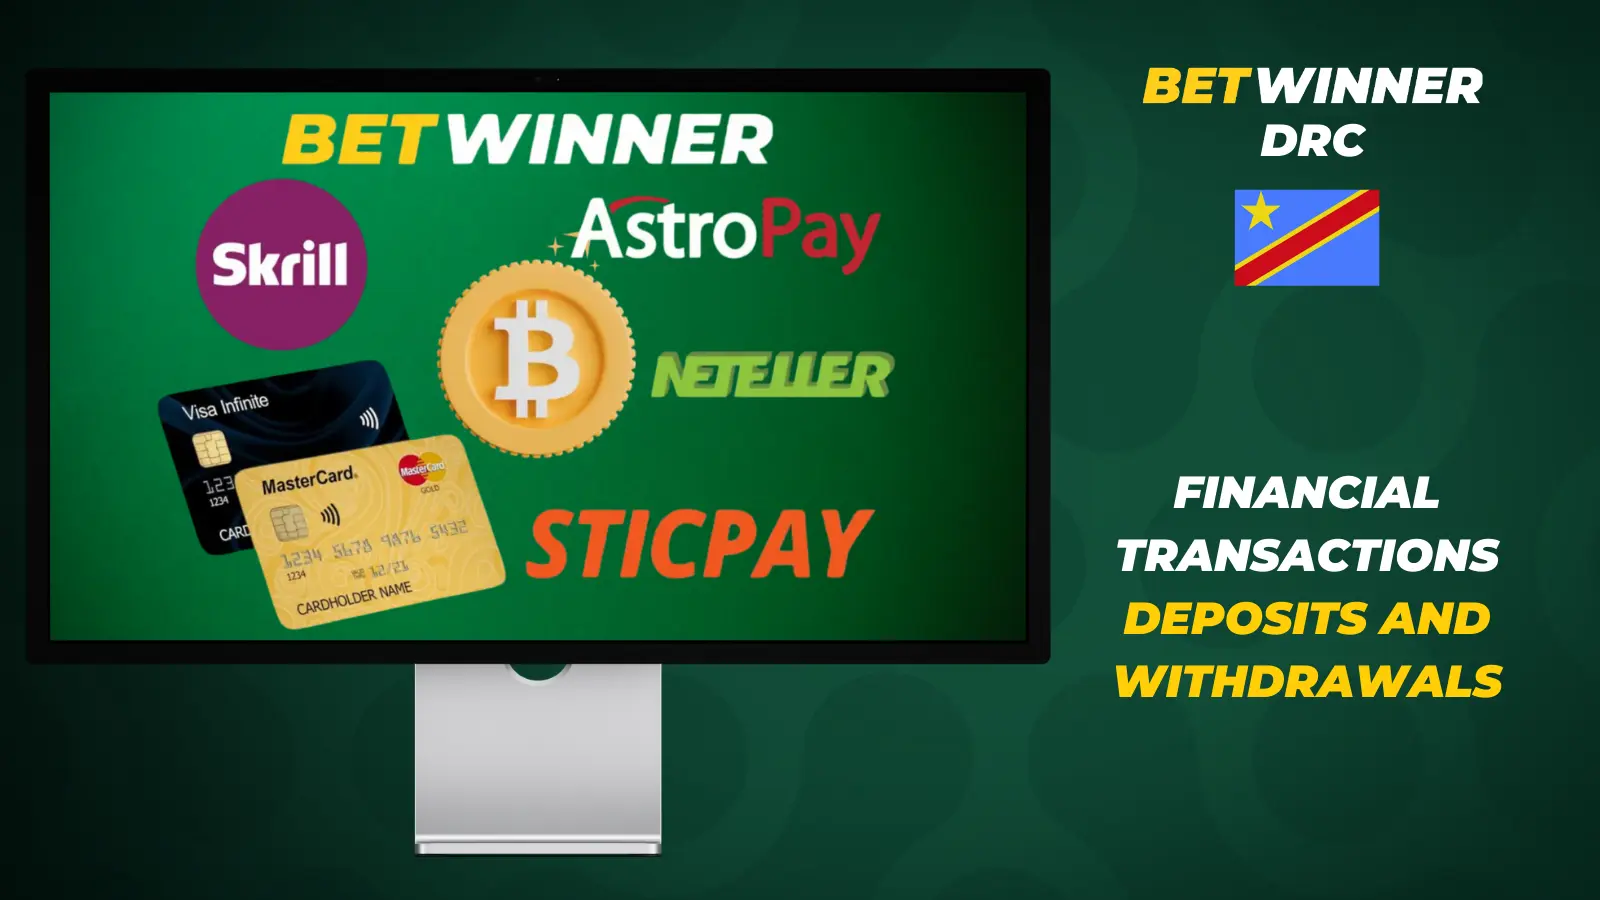 Why Betwinner Sports Bets Is The Only Skill You Really Need